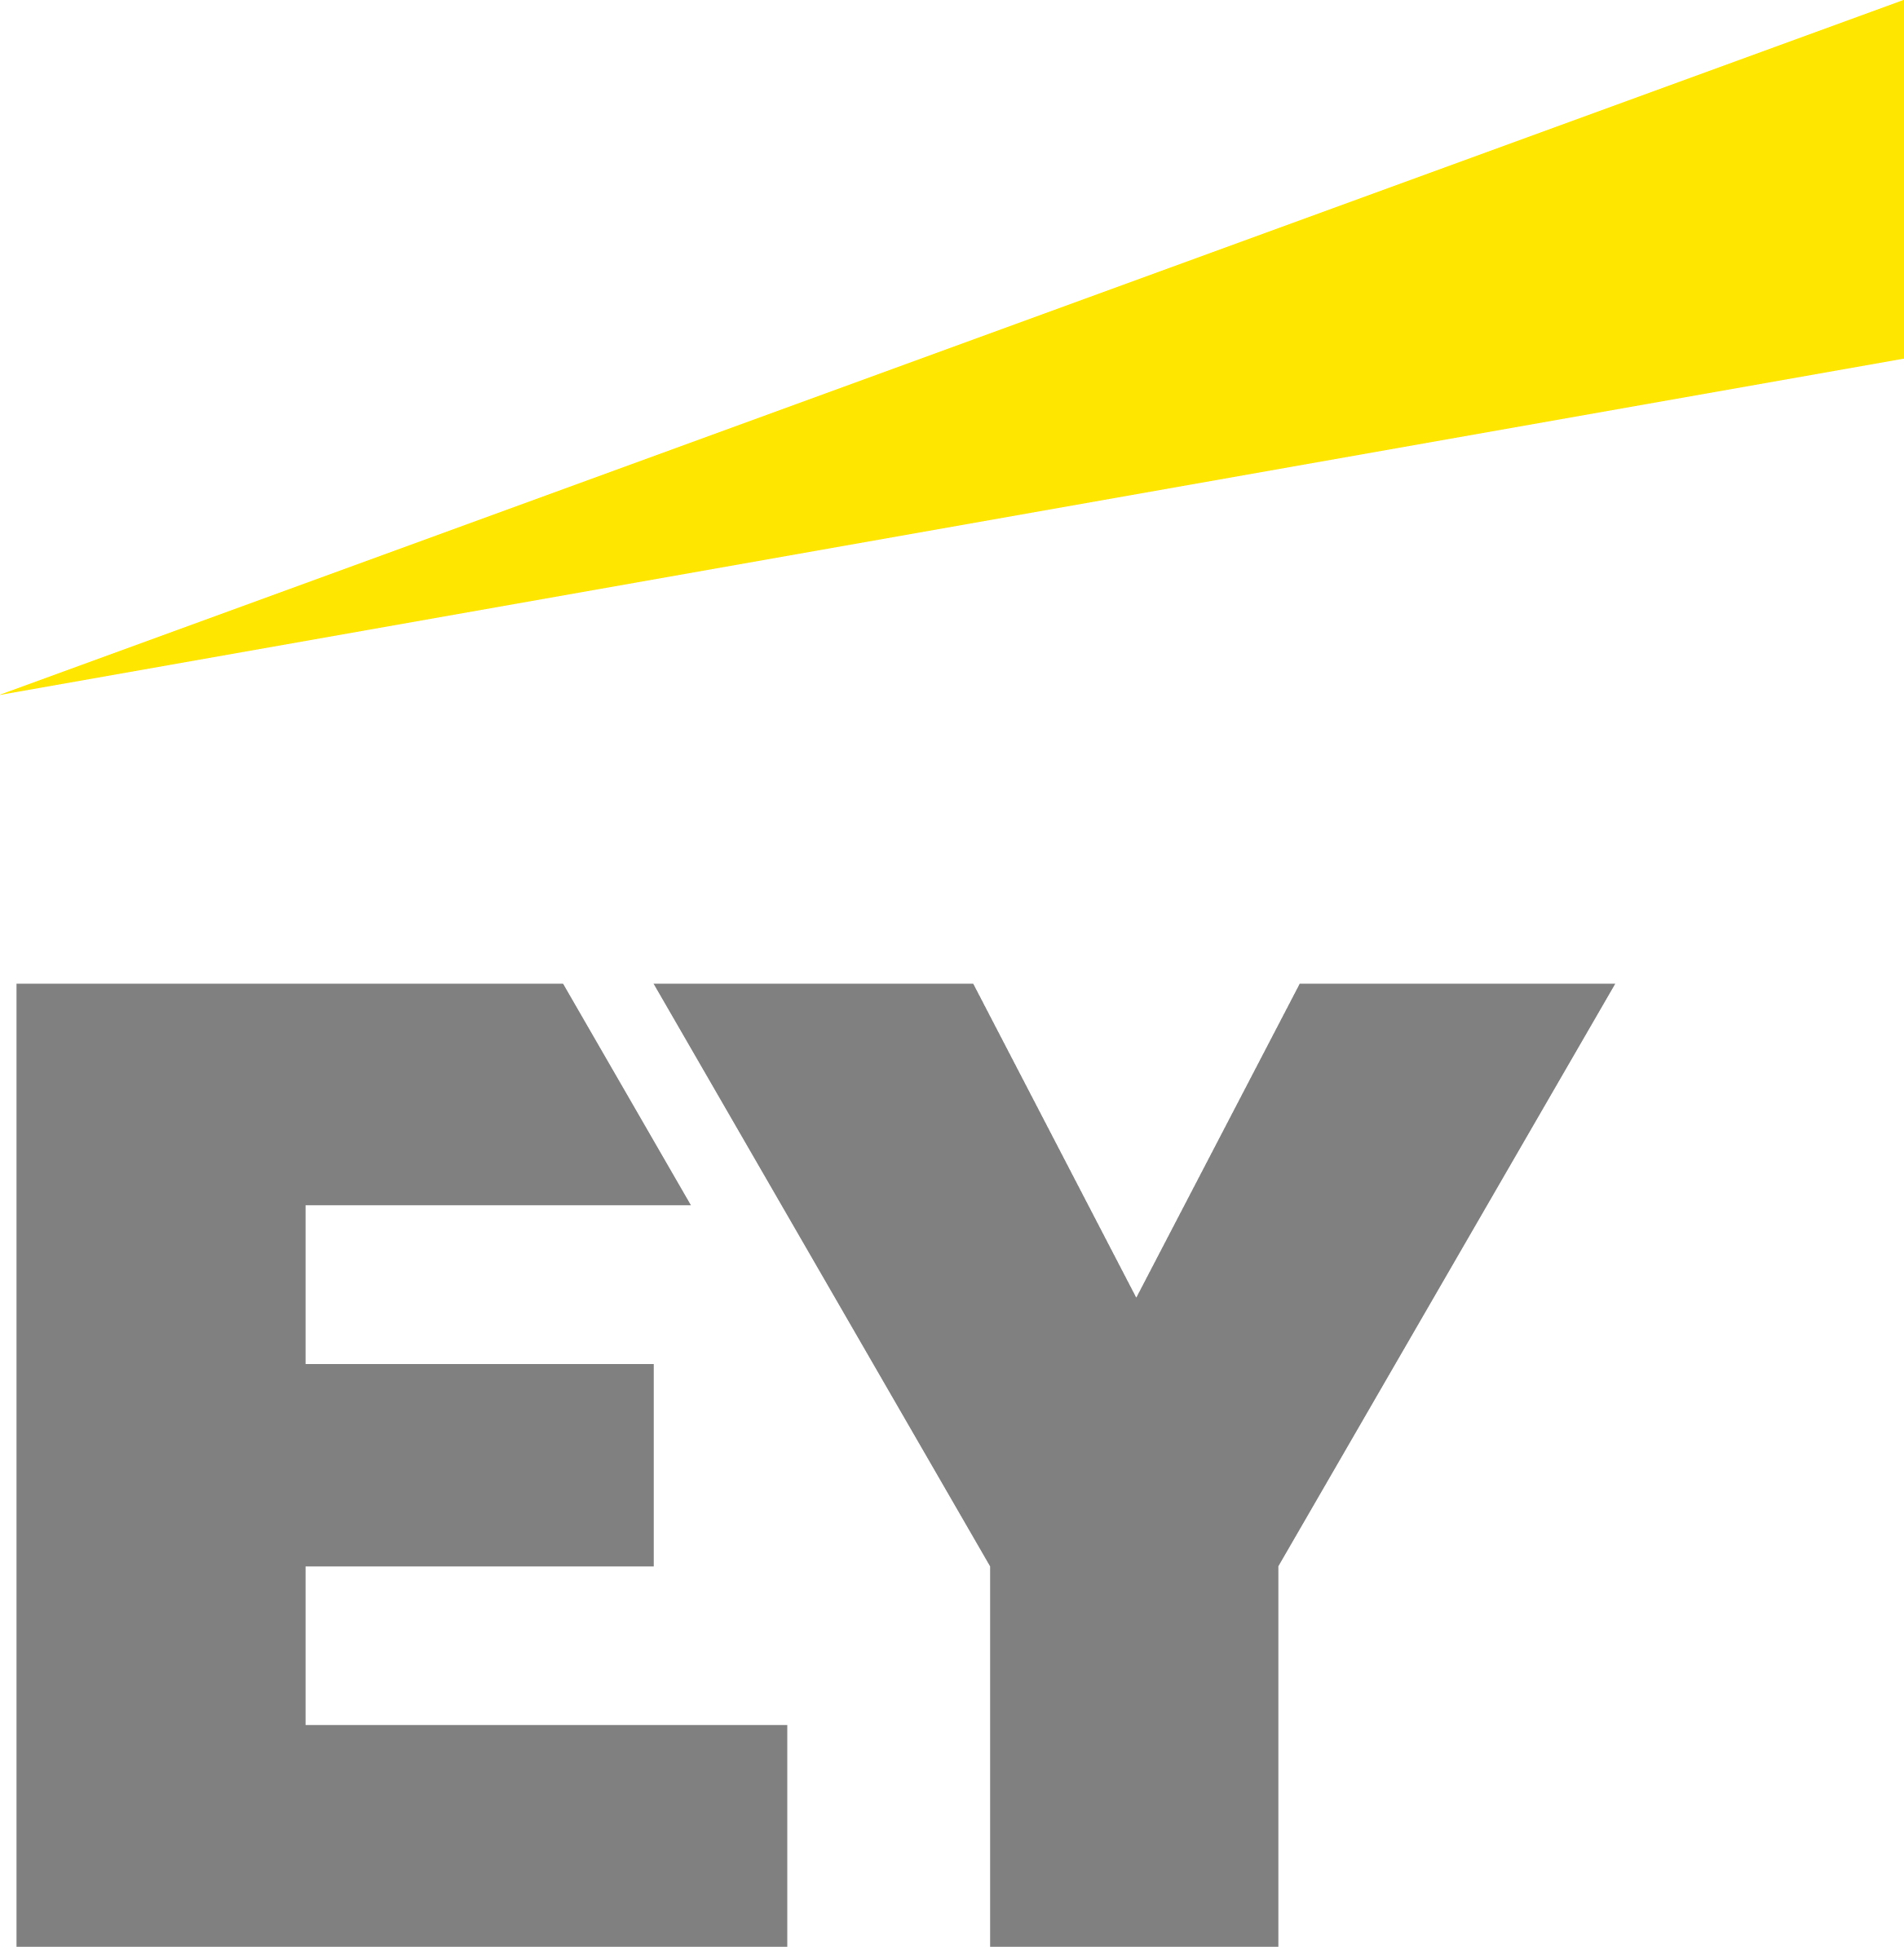 Ernst & Young Management Consulting GmbH